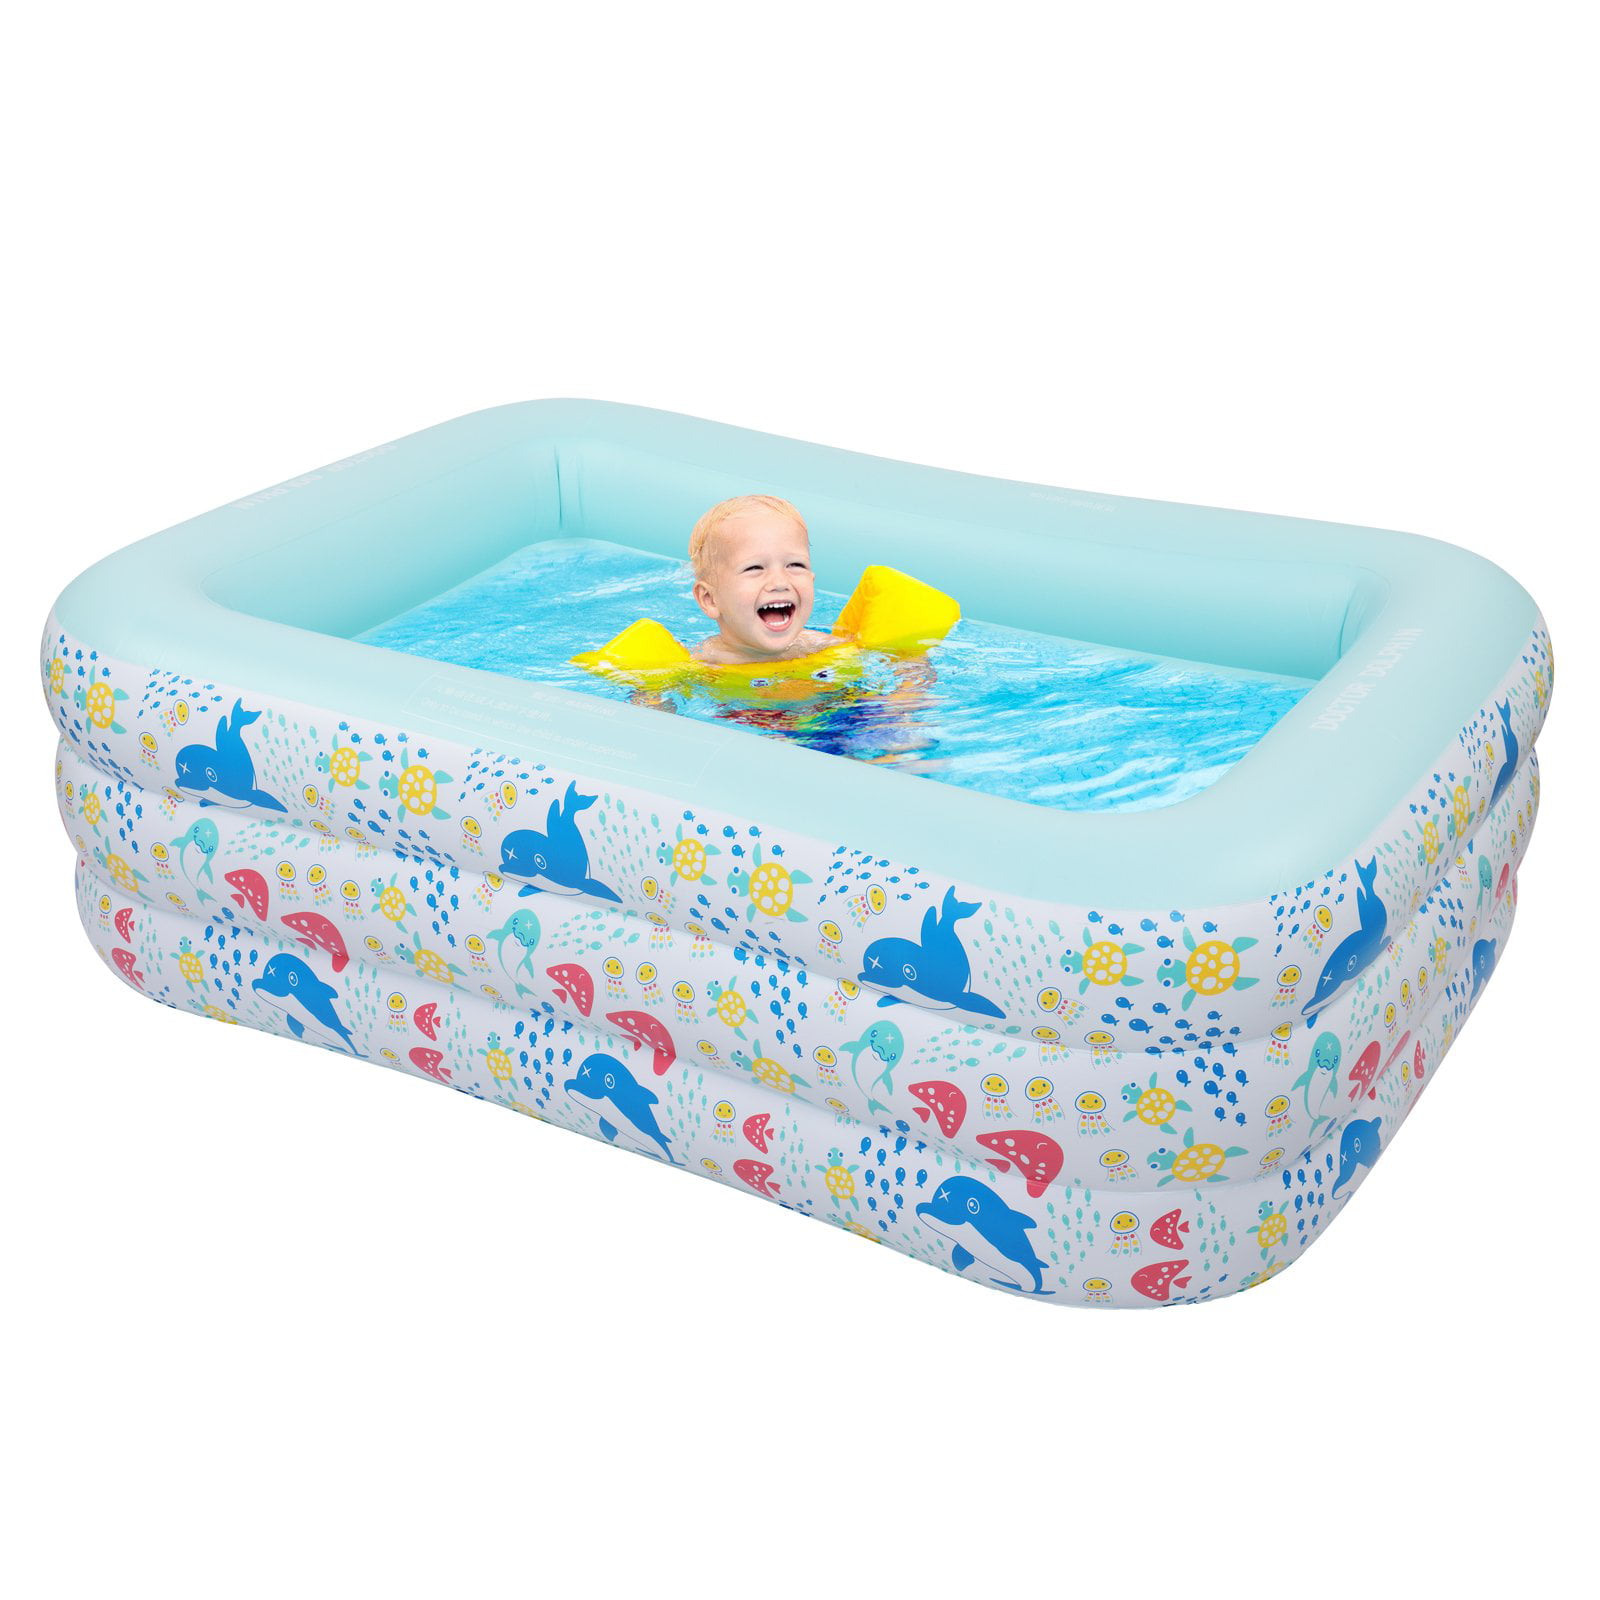 Inflatable Swimming Pool for Kids 82